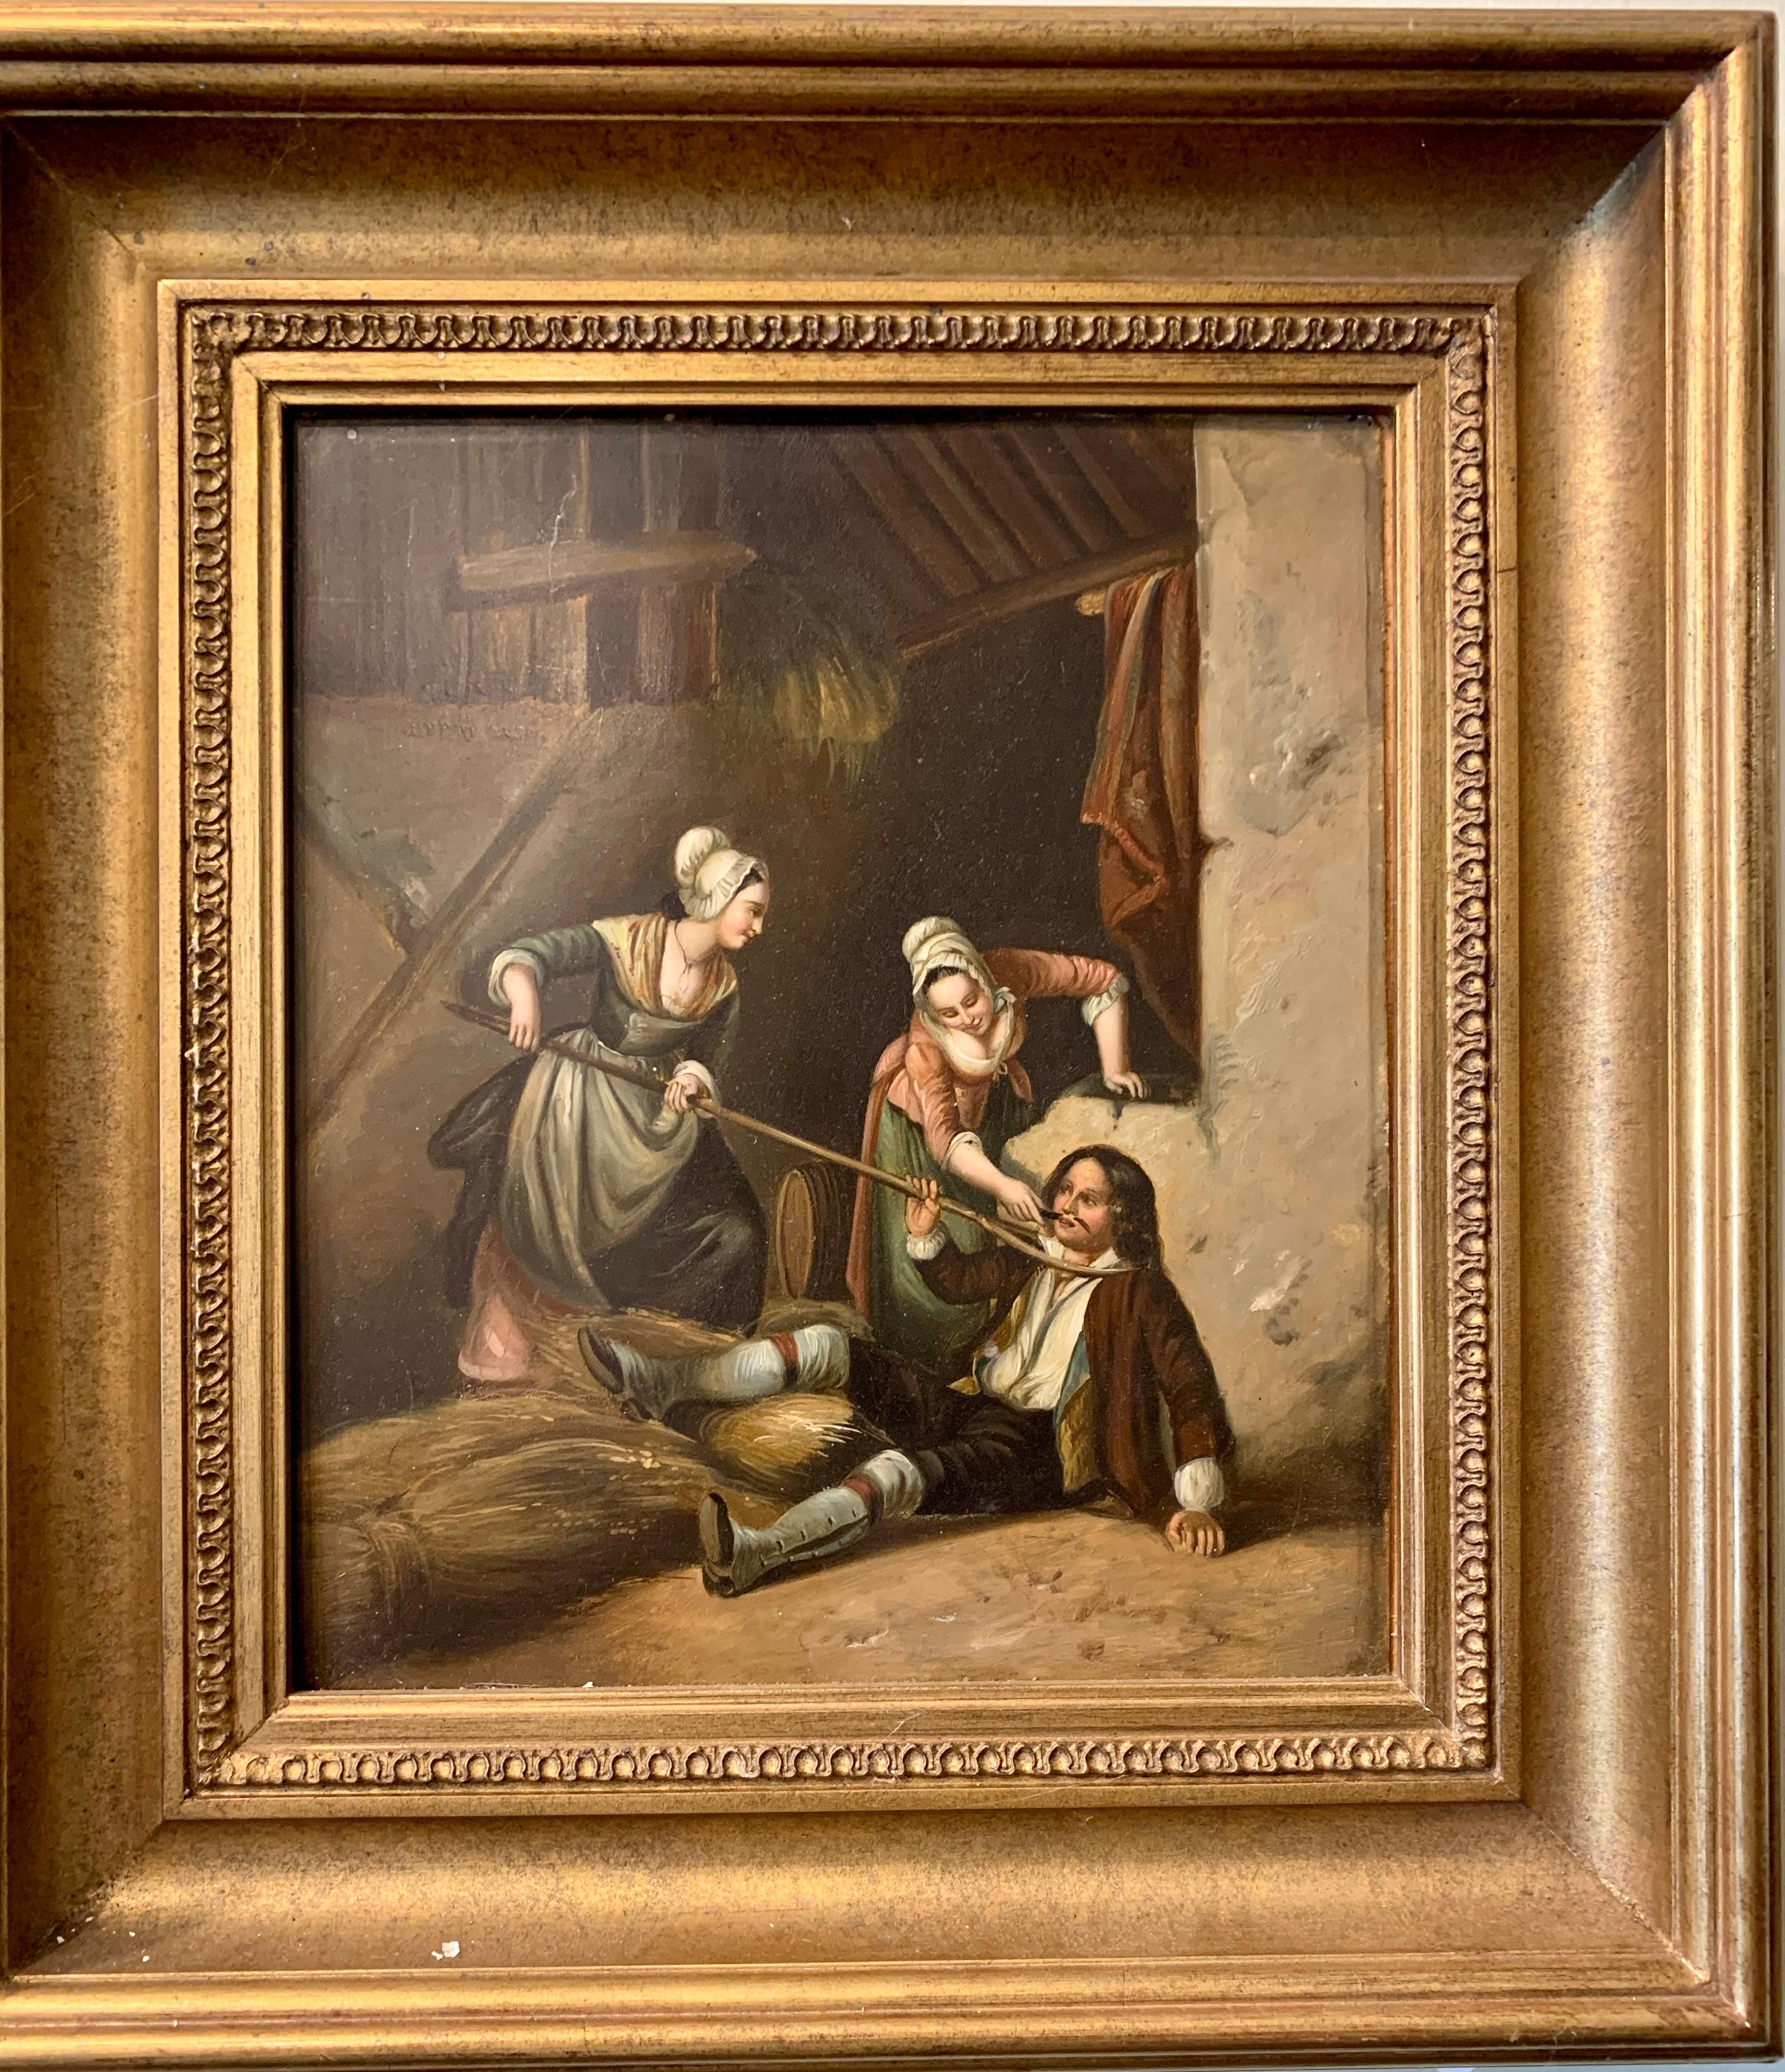 German oil painting, Figures in an interior/barn playing, 19th century, Antique